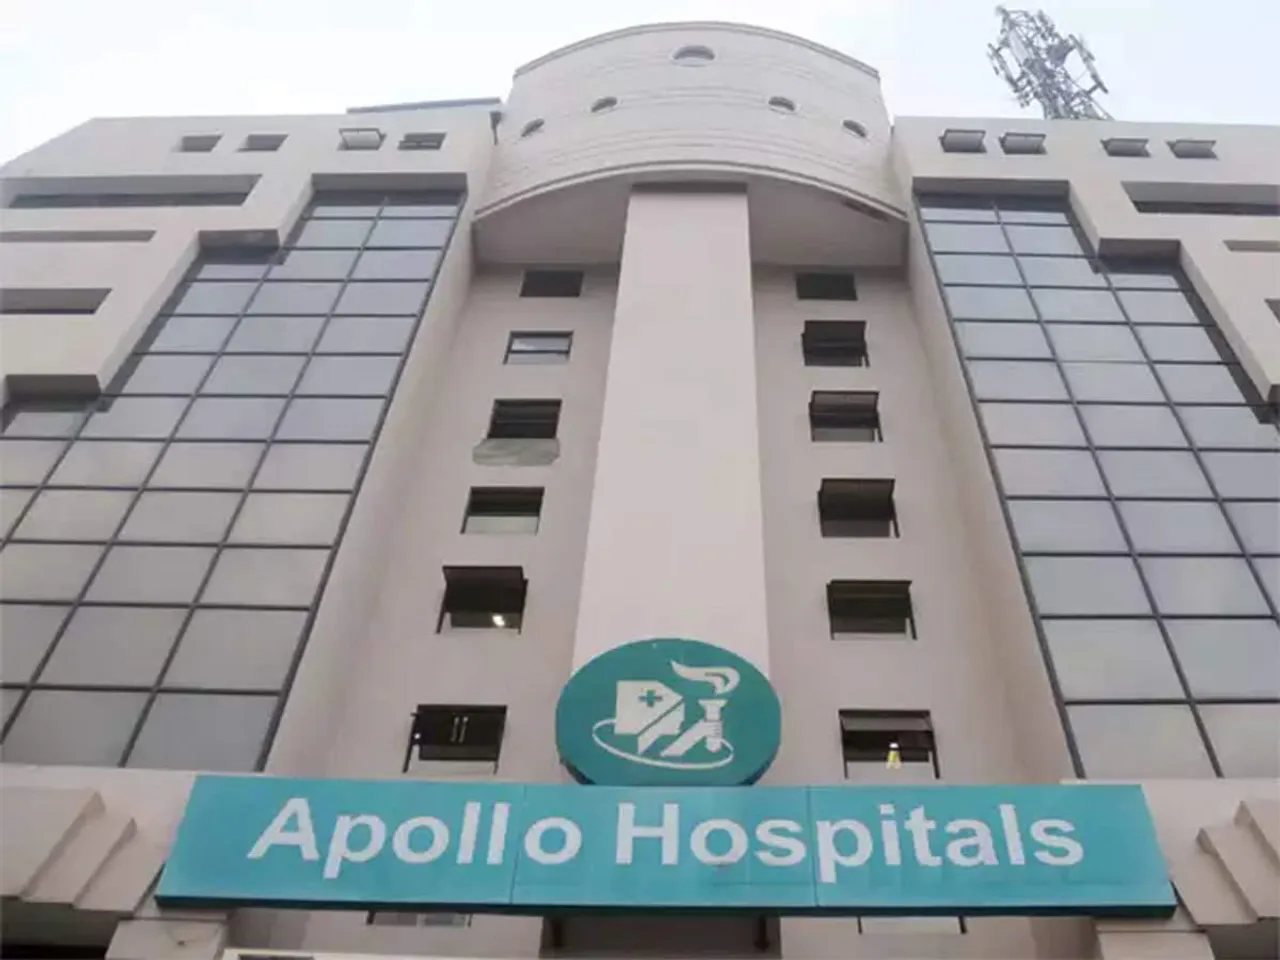 Apollo Hospitals announces launch of multi-specialty emergency medical centre in Ayodhya